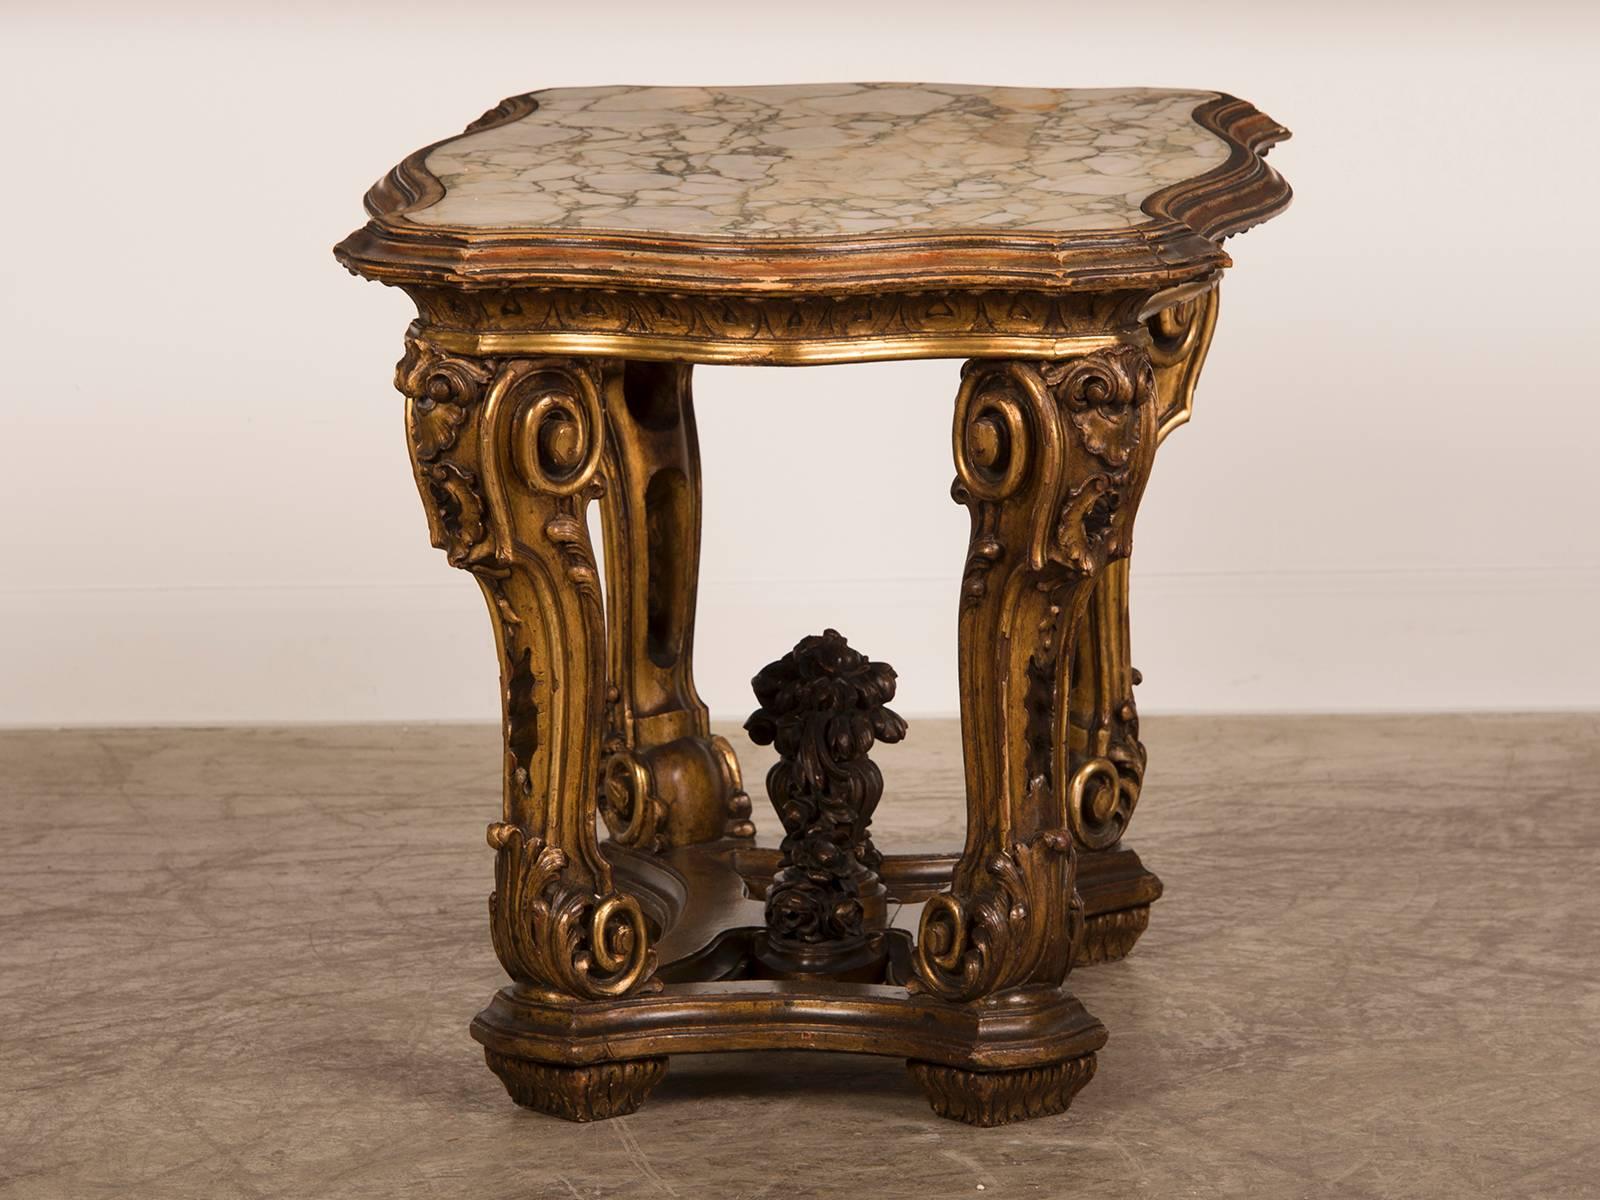 Late 19th Century Antique Italian Gilded Wood Table from the Belle Epoque Period, circa 1890